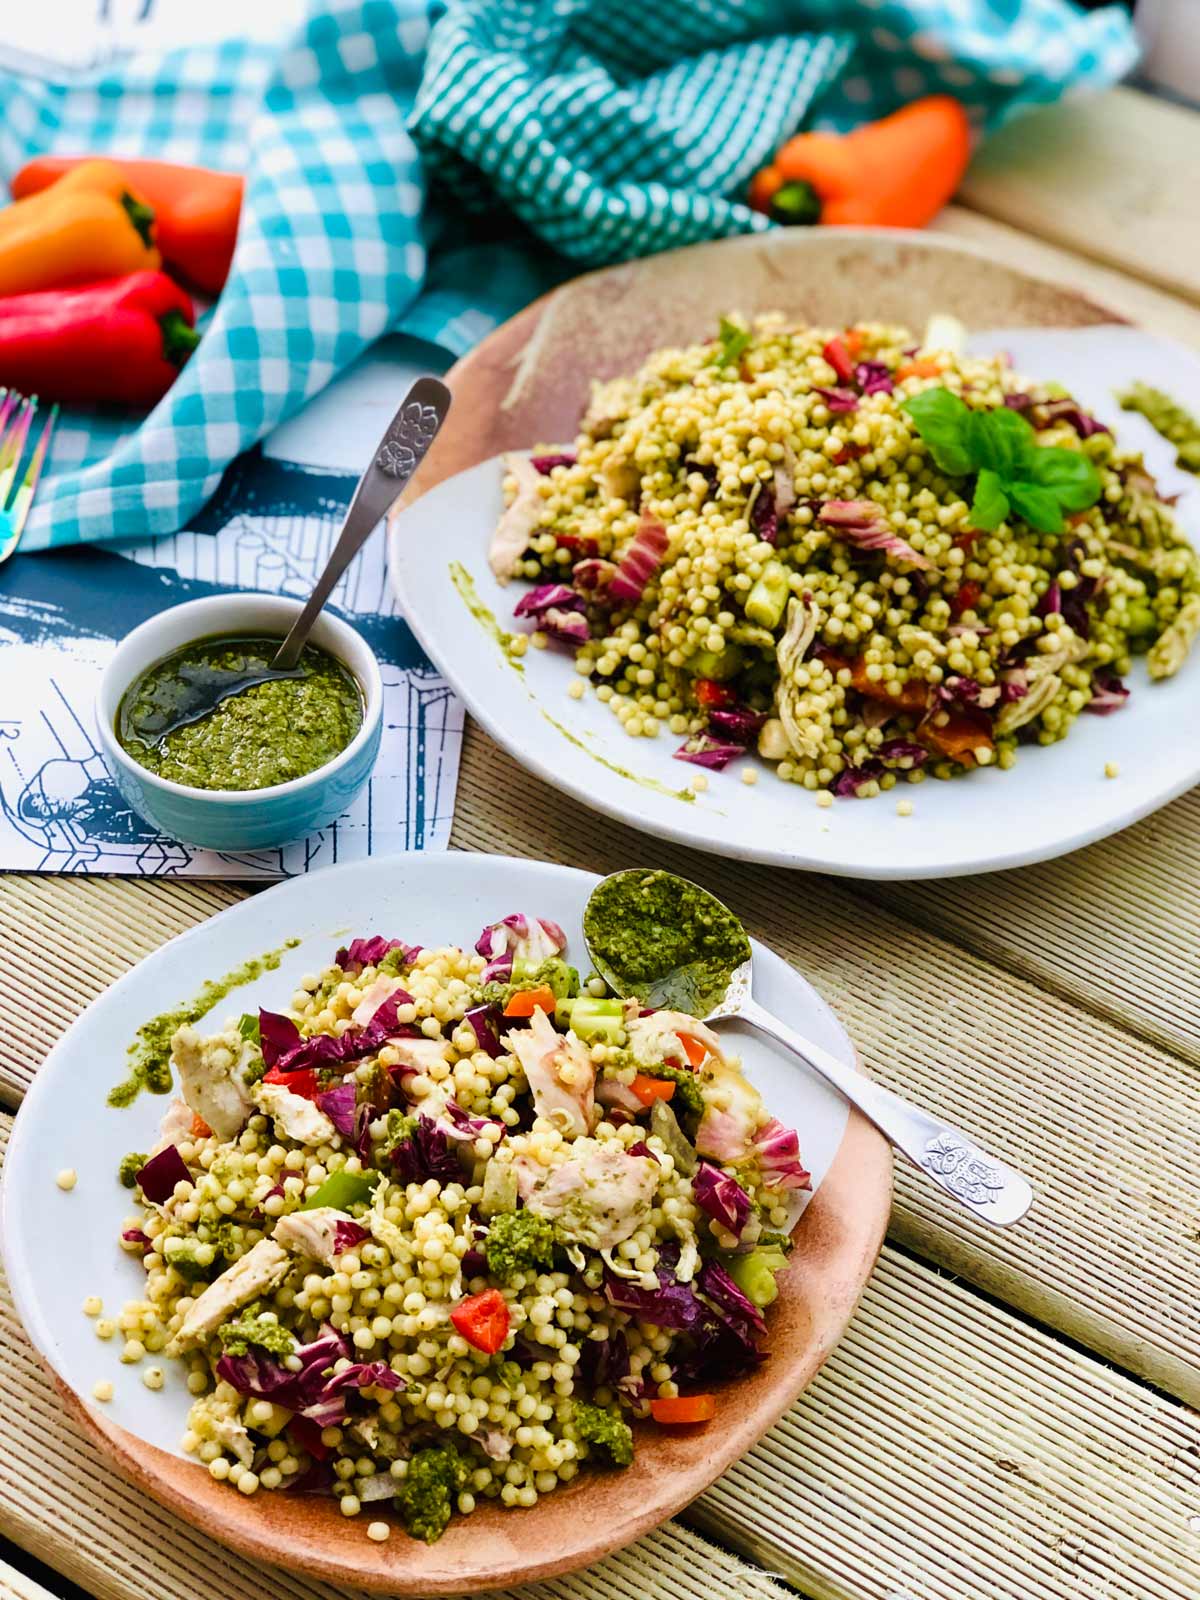 Healthy Chicken breast recipe with giant couscous, pesto sauce and radicchio